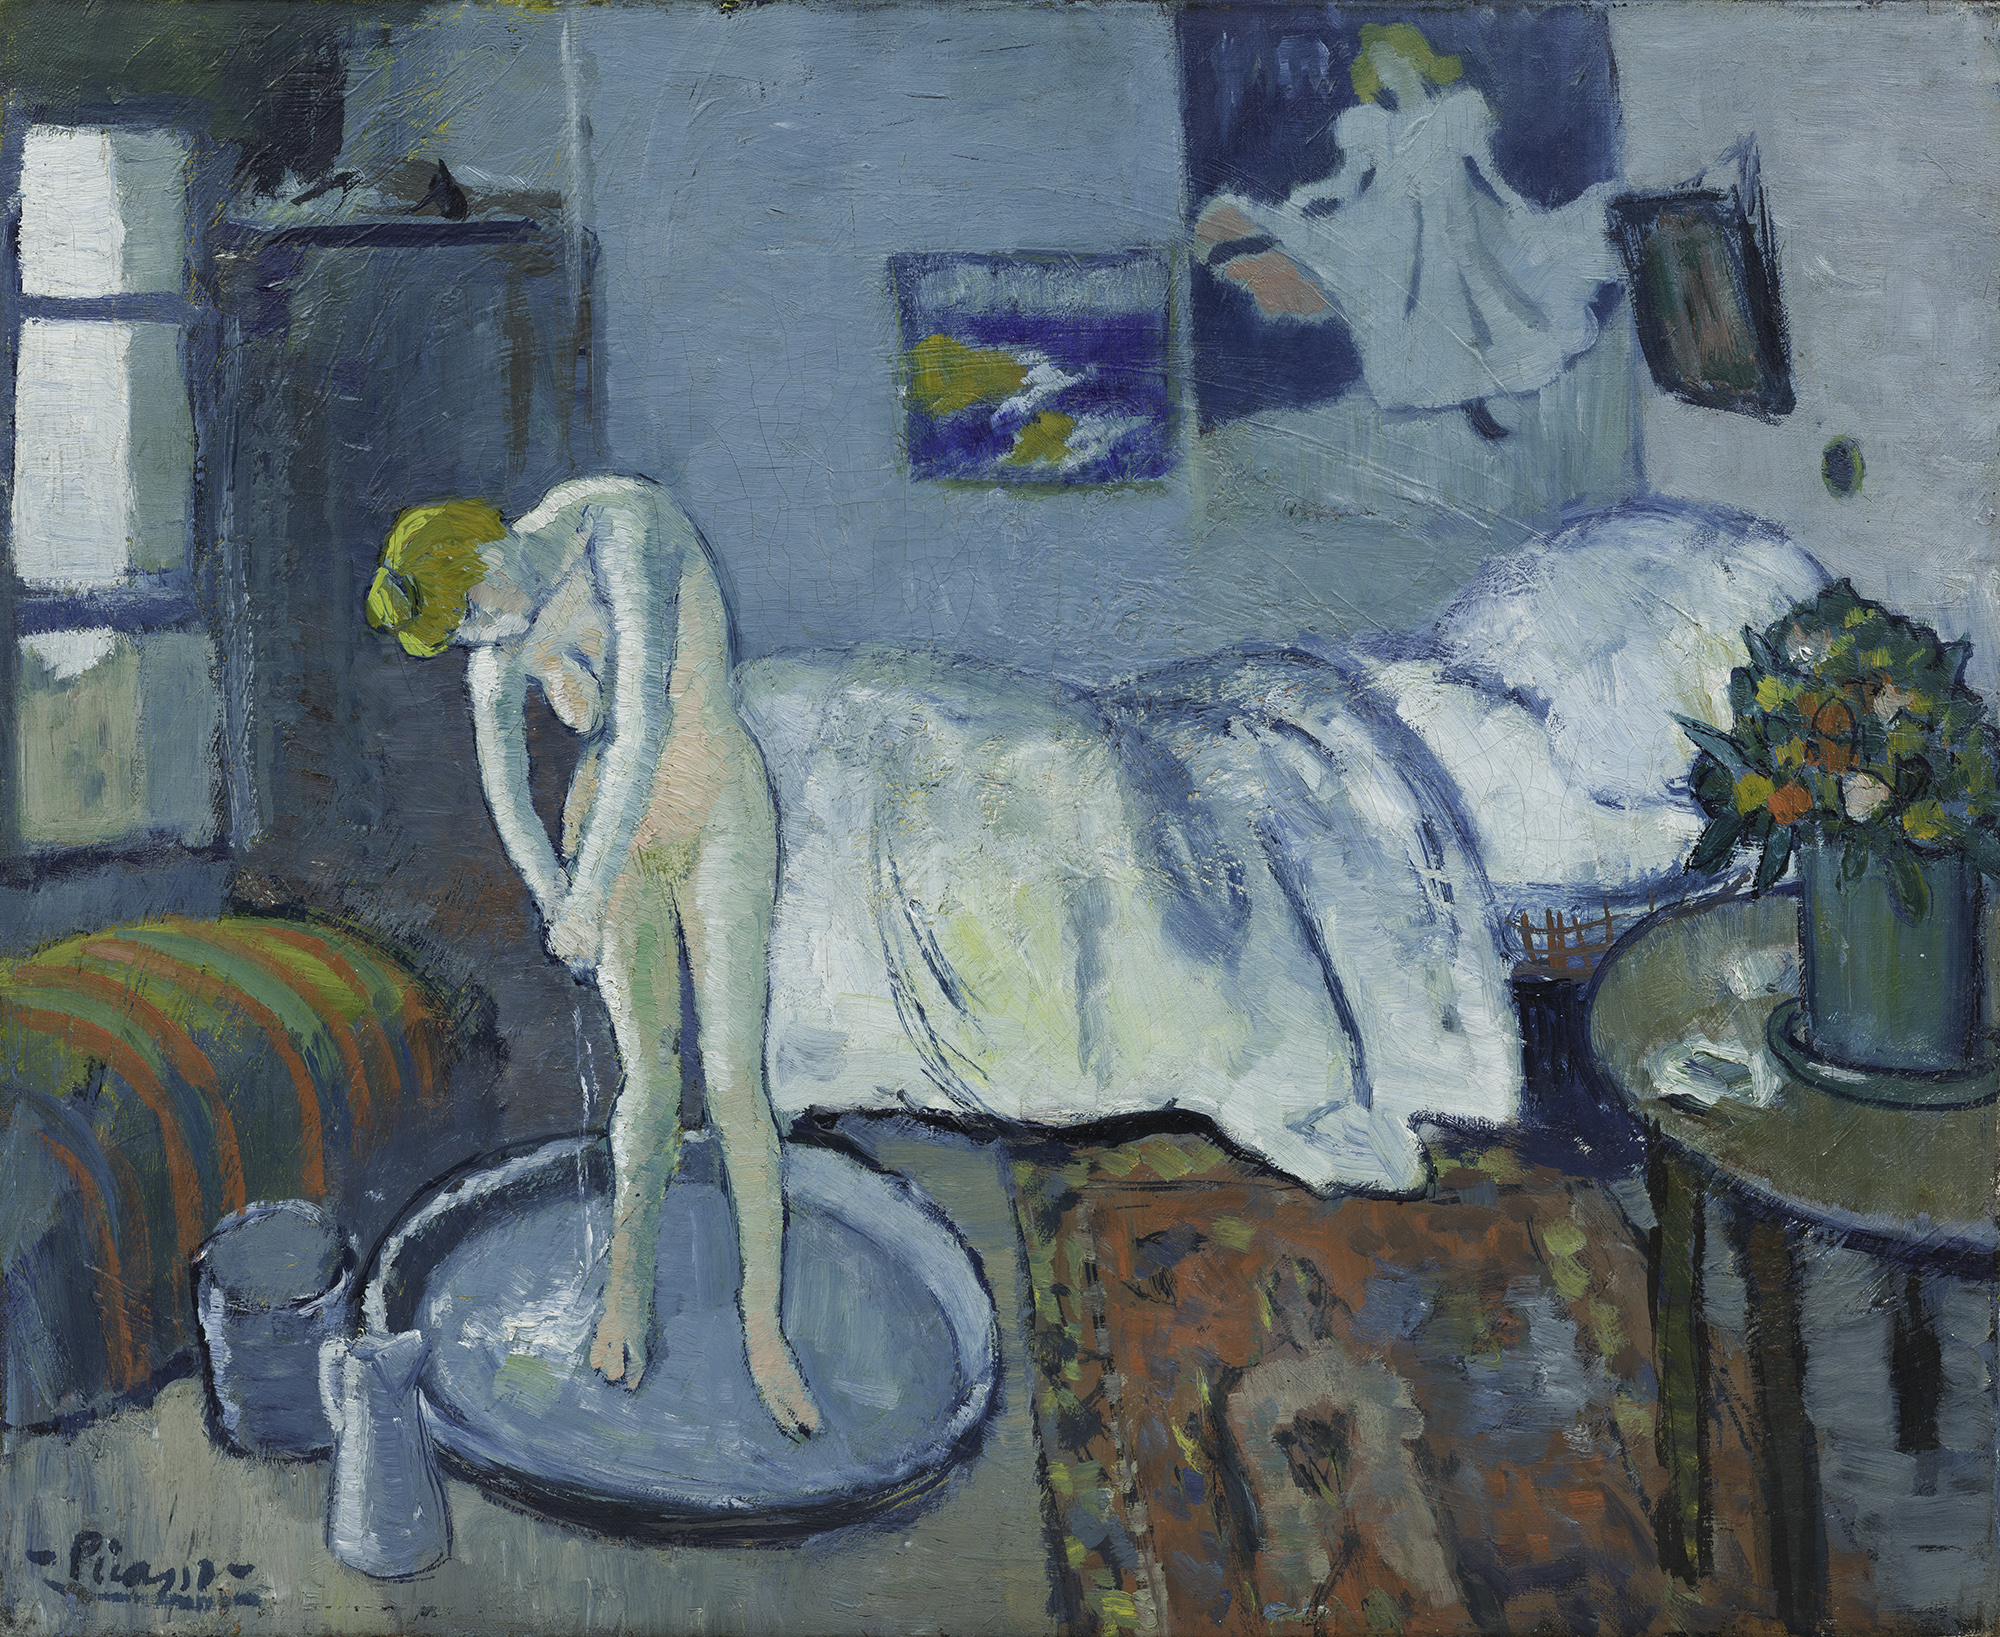 Pablo Picasso: The Blue Room, 1901, resembles his studio at the the time.